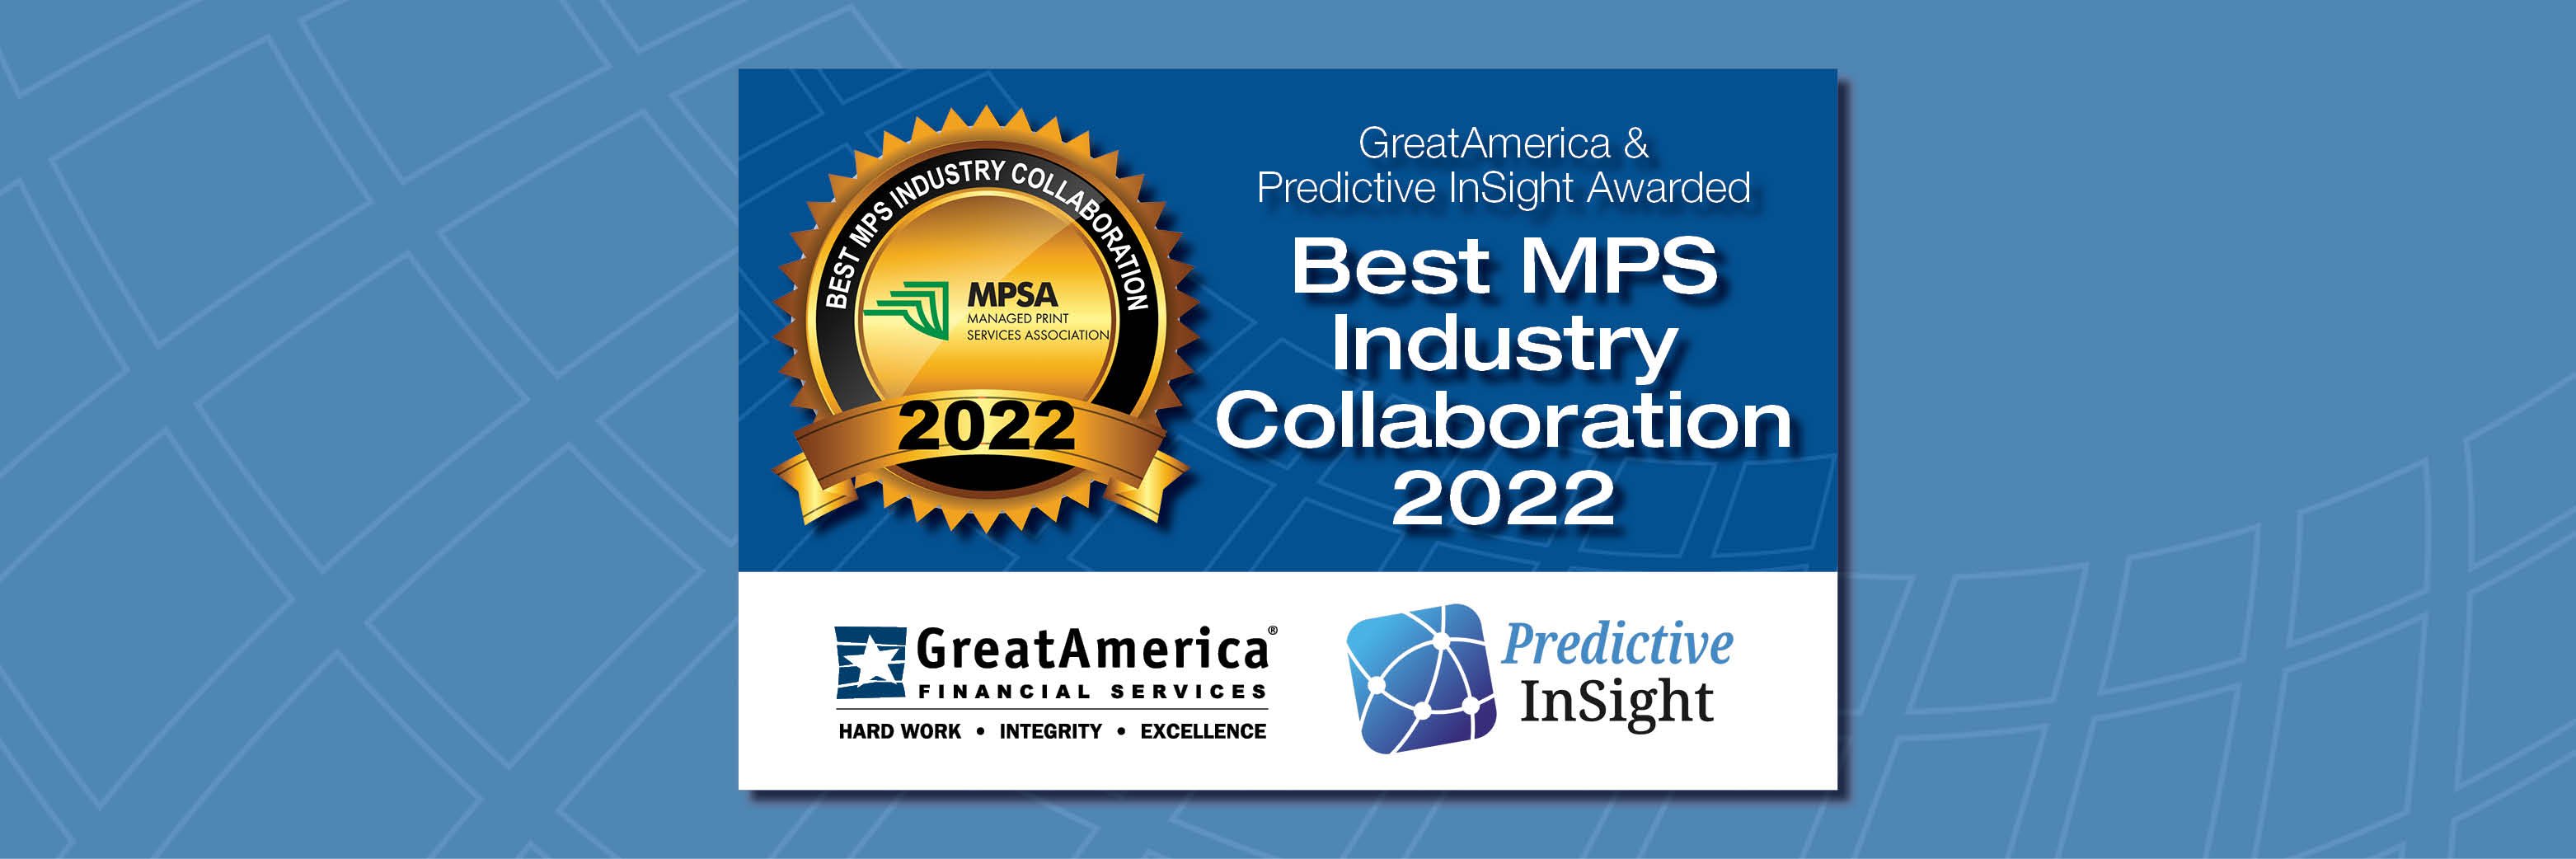 GreatAmerica and Predictive InSight Awarded Best MPS Industry Collaboration 2022 for ecommerce Integration